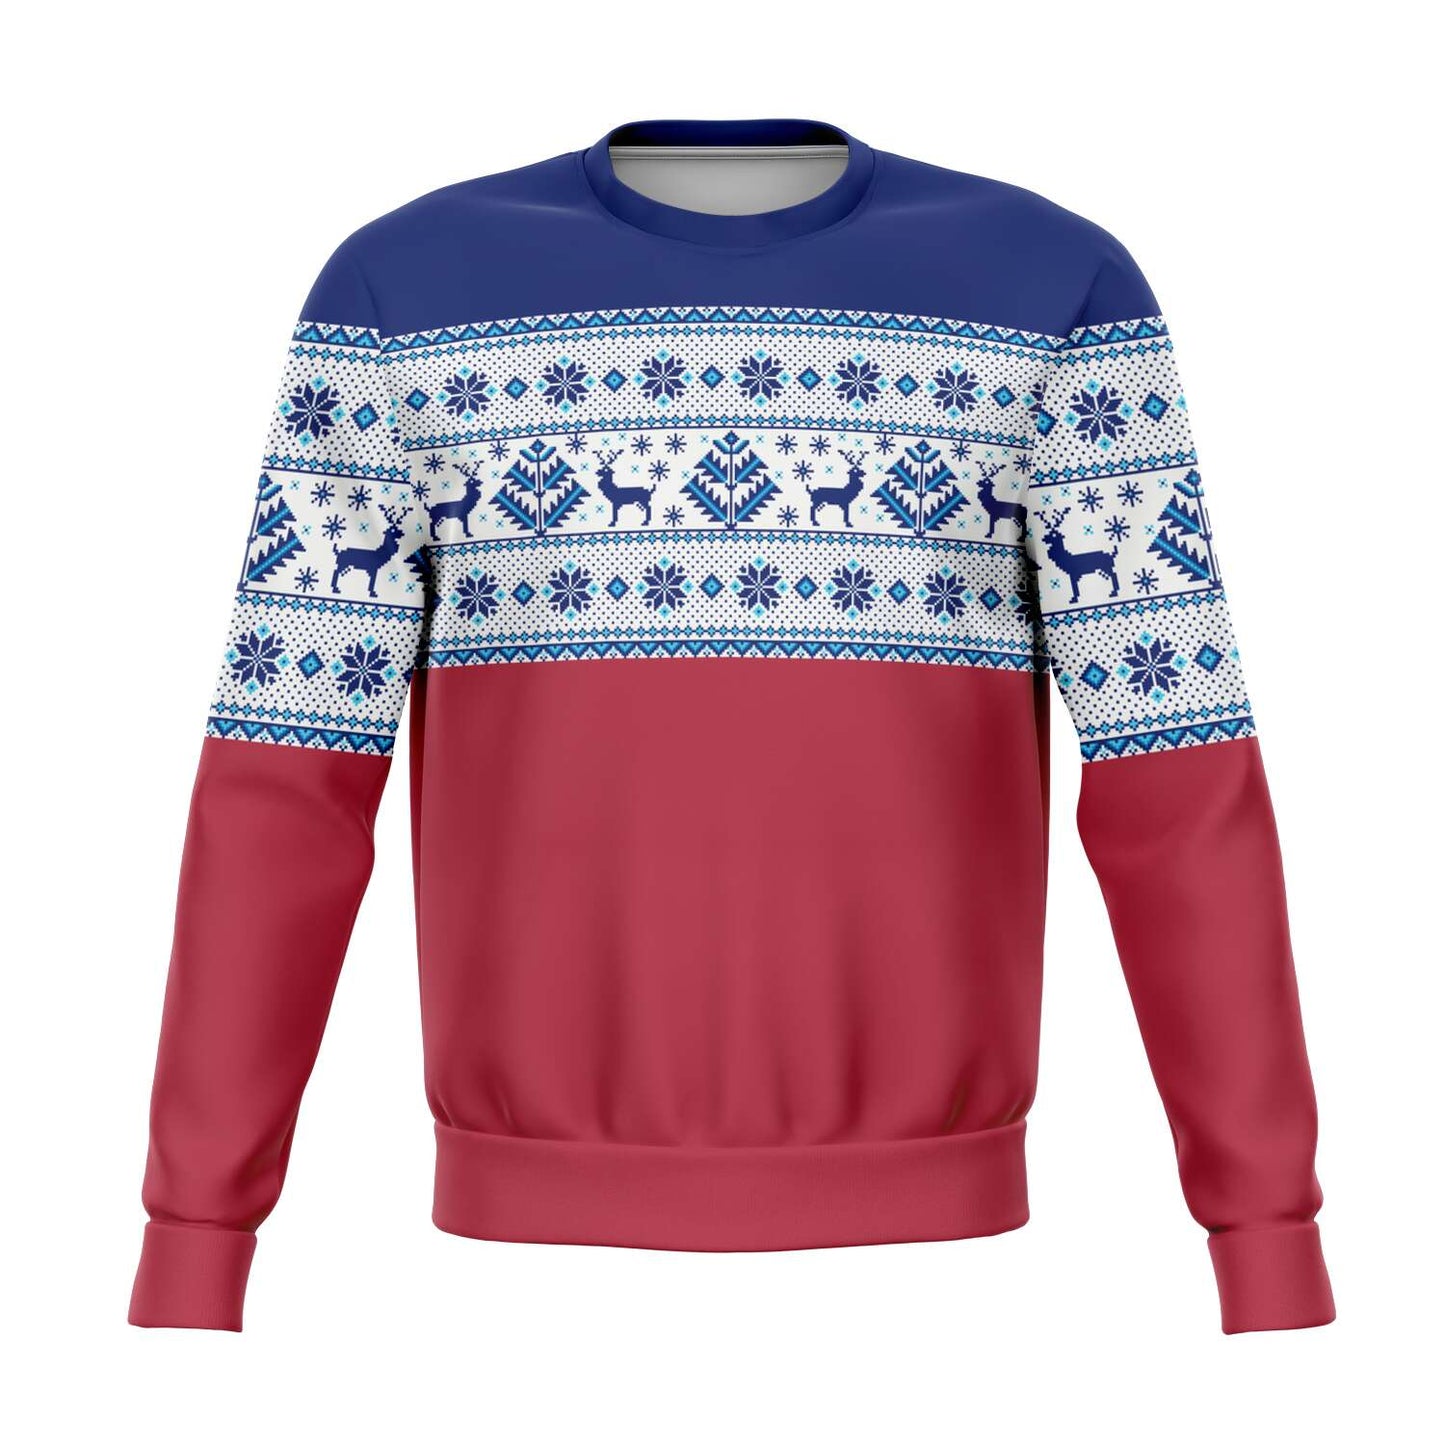 Winter Holiday Sweatshirt, Vintage Blue Red White Snowflakes Printed Fair Isle Christmas Sweater Unisex Ugly Xmas Women Men Party Gift Starcove Fashion